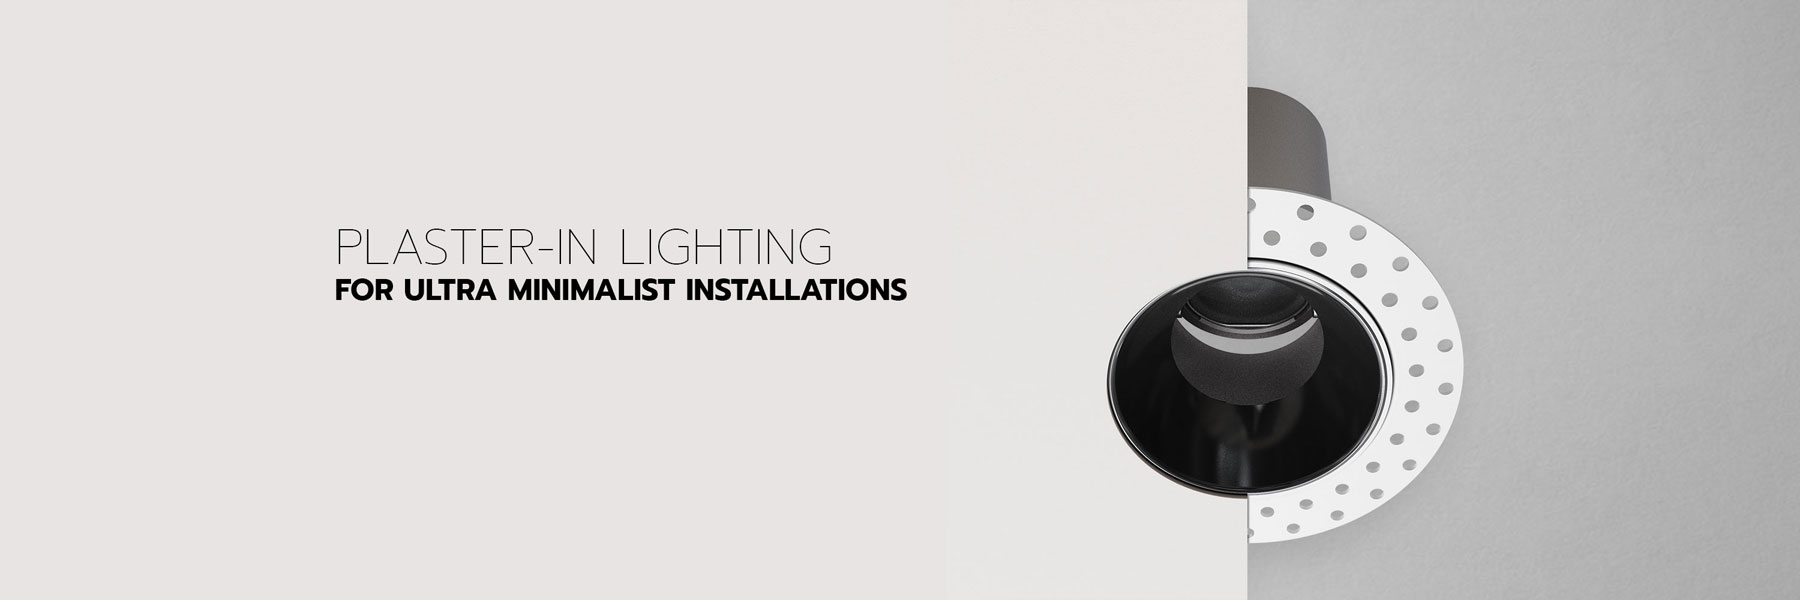 Intus Trimless LED Downlights